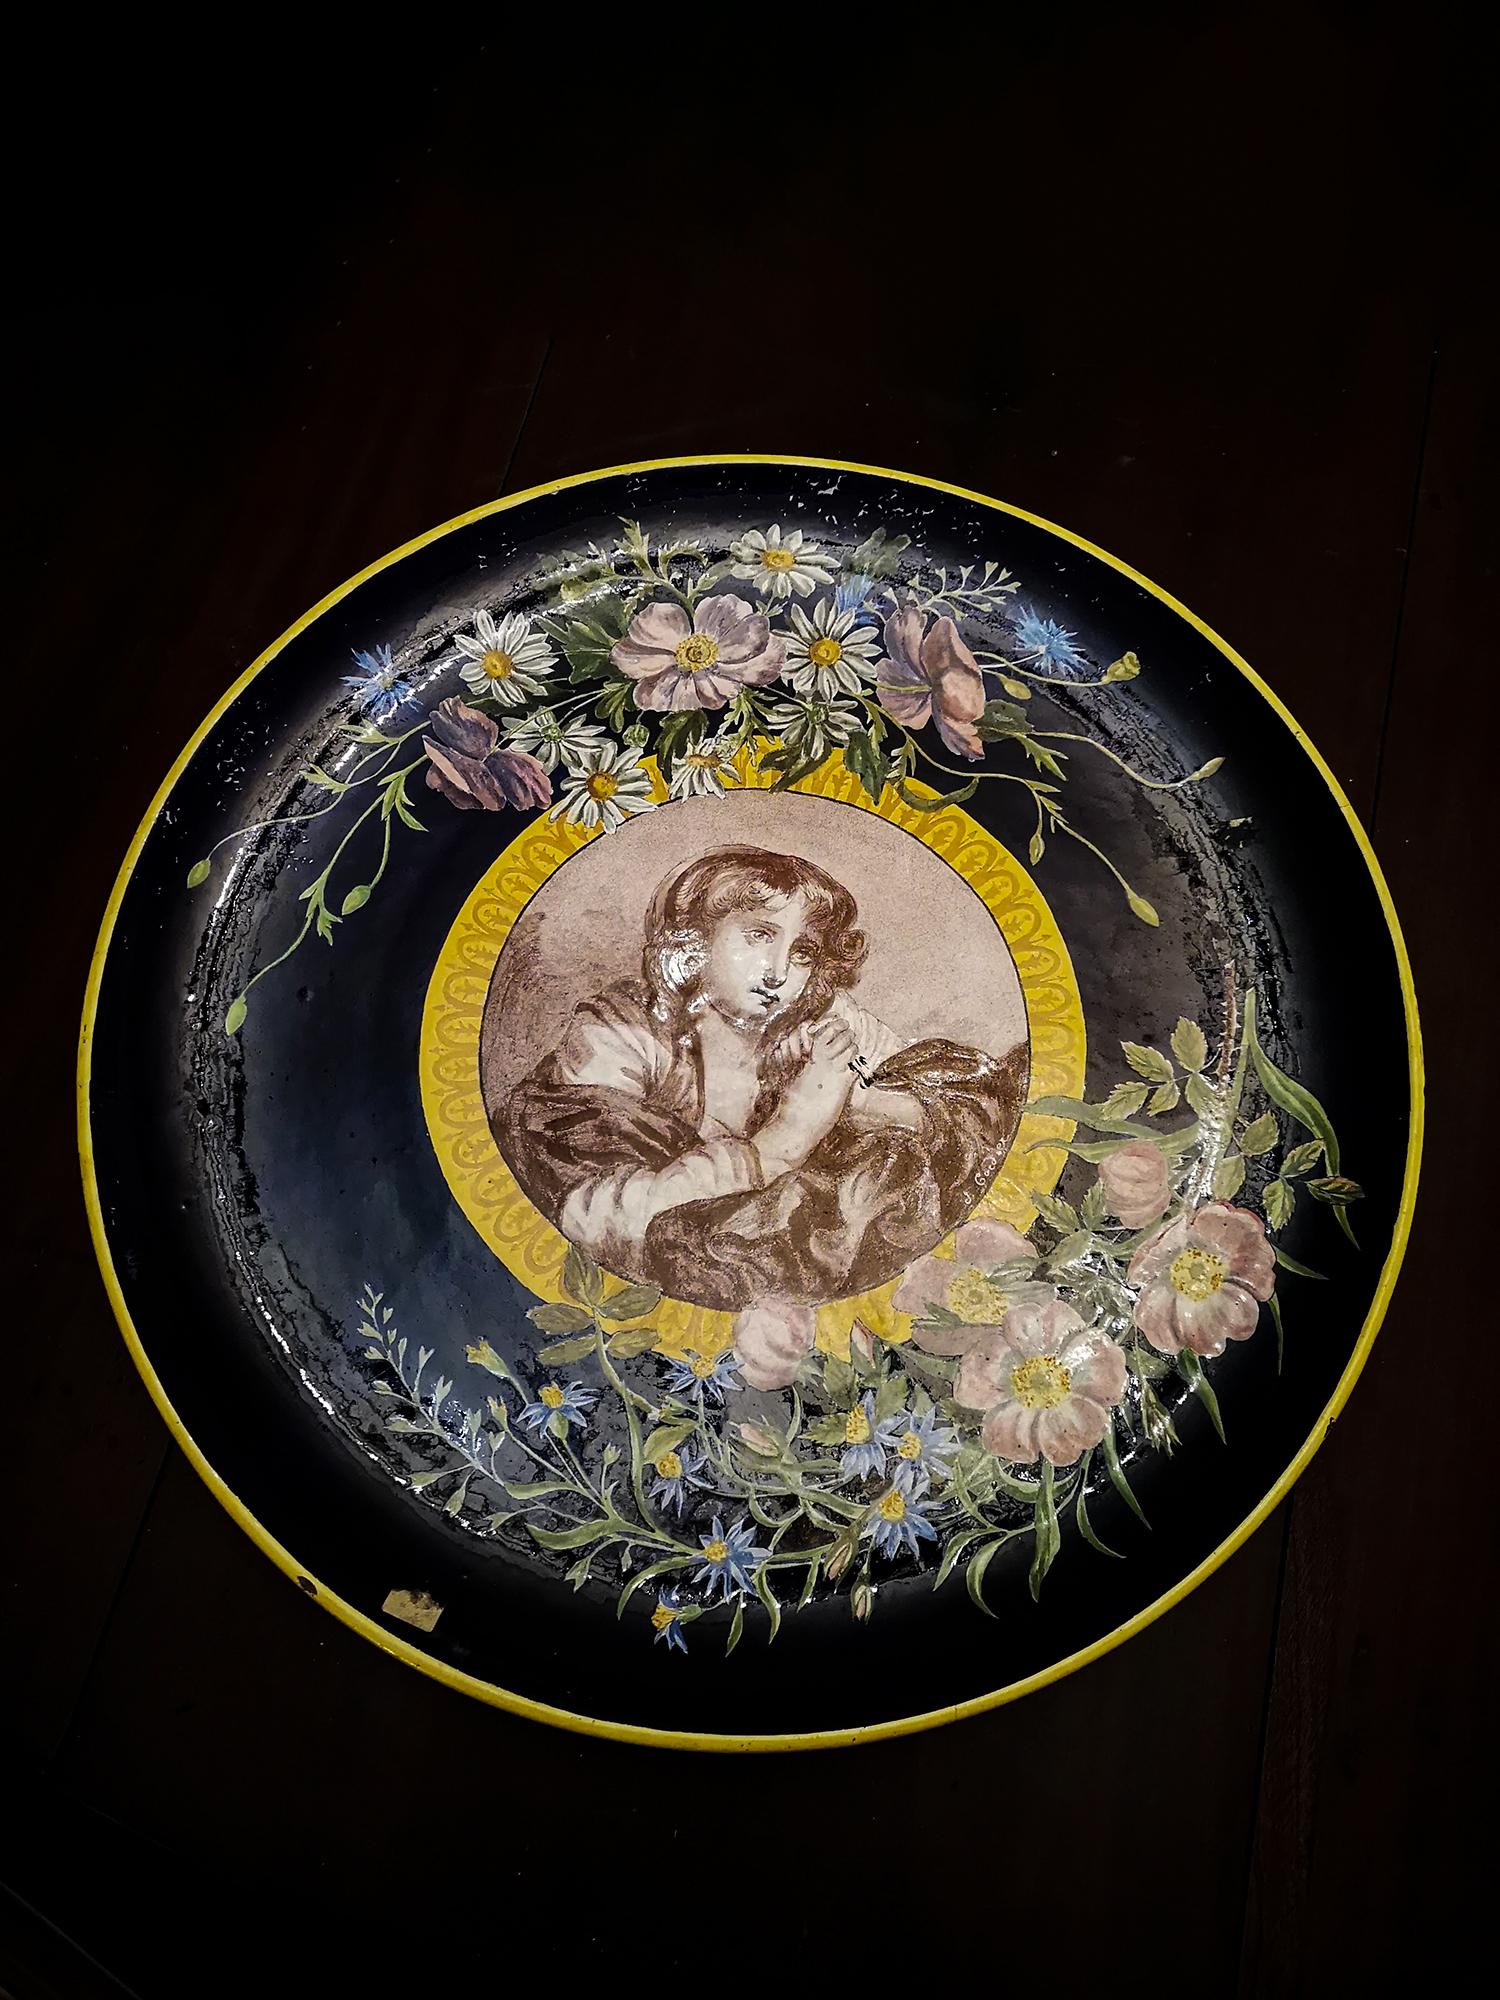 A large round platter platter of Limoges porcelain with gold decoration, delicate arabesques and flowers and a woman in the center painted after the artist Jean-Baptiste Greuze (Tournus 1725-1805 Paris) made in the  Vincennes Porcelain foundry of 